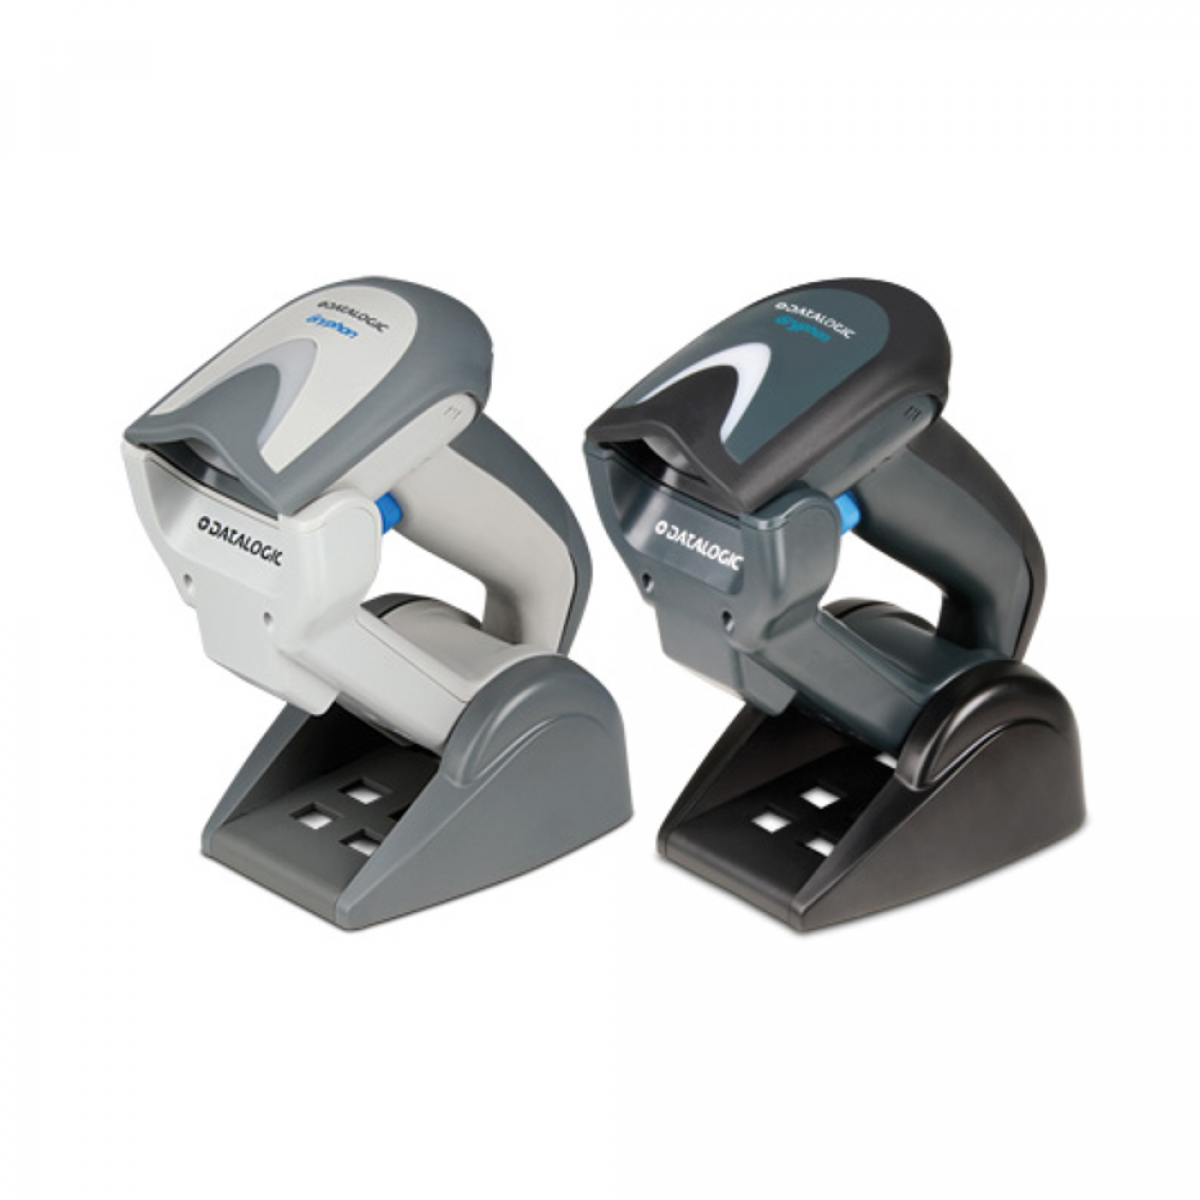 Datalogic GBT4100 scanners with cradles up